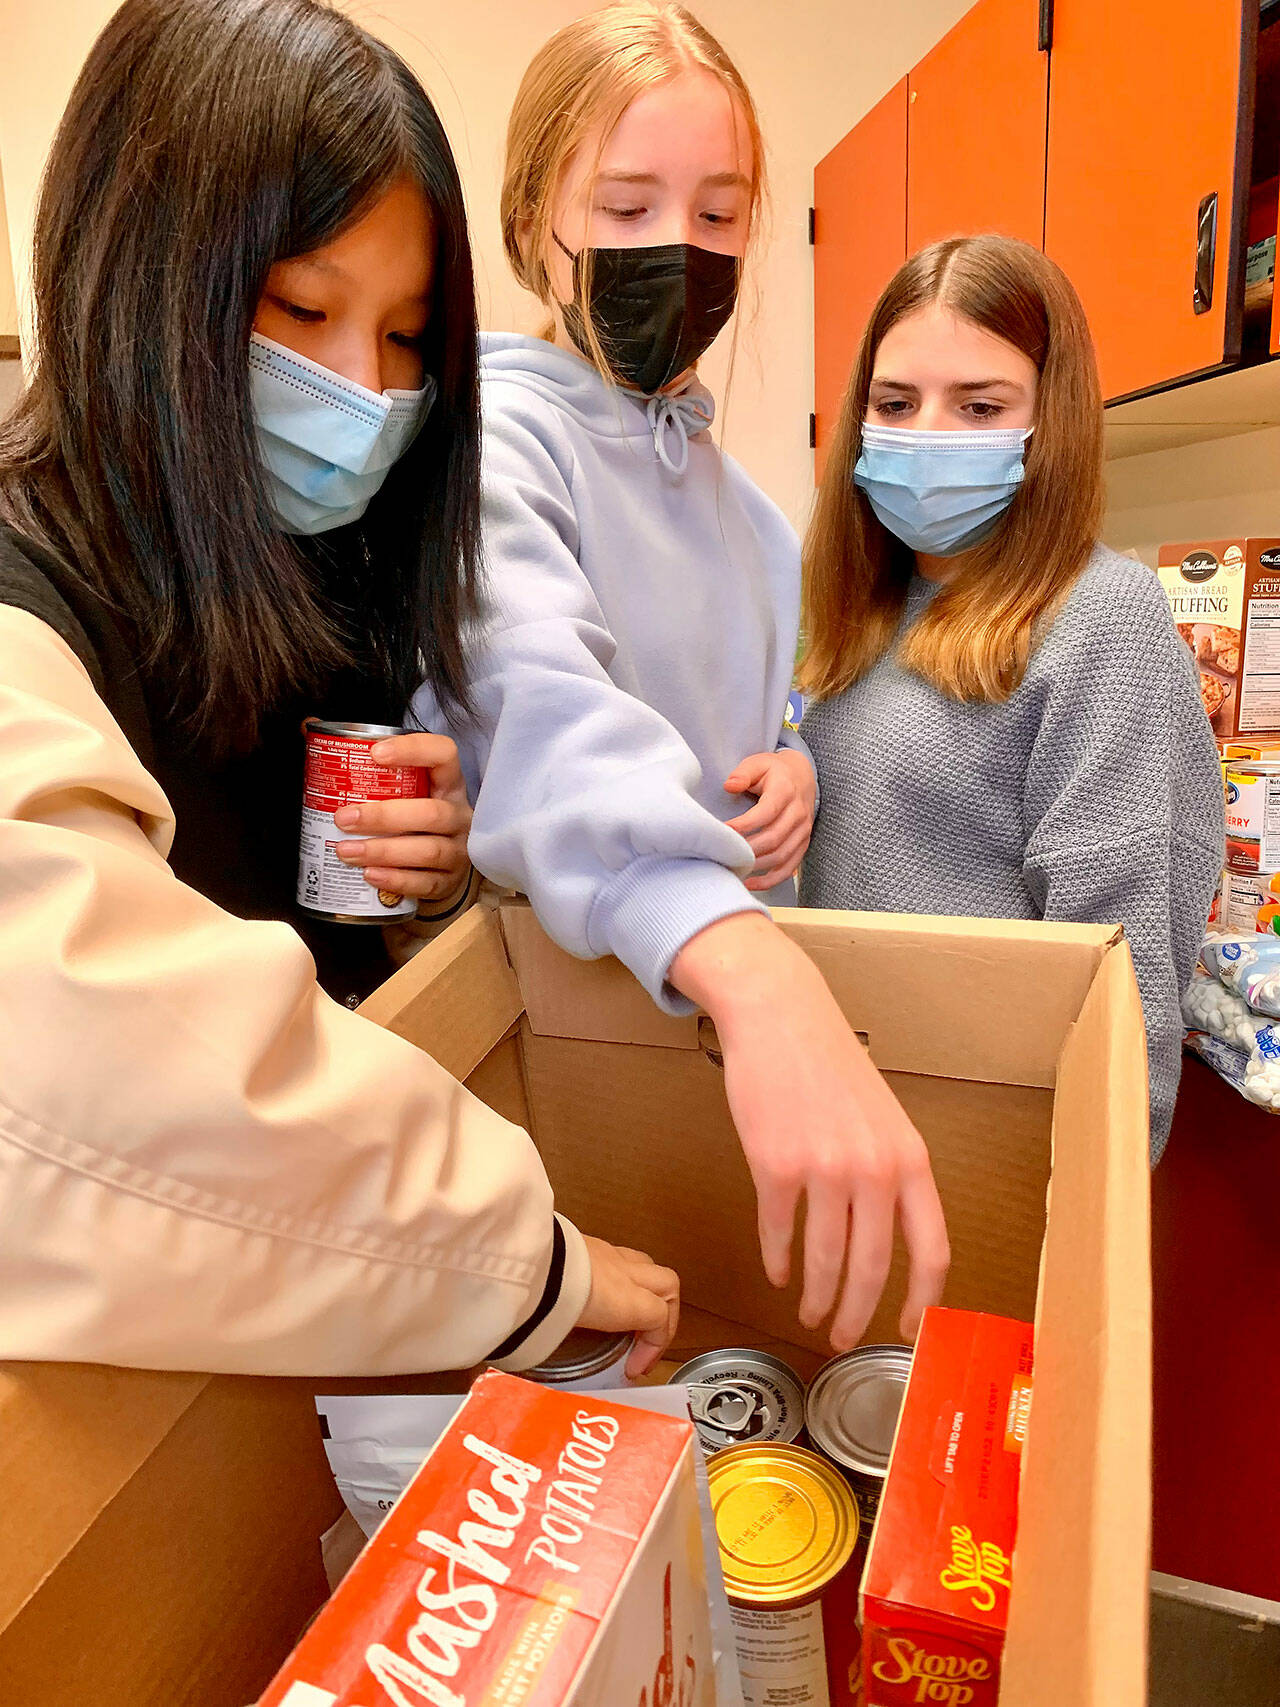 Kai Zhong (left), Ellie Wright and Aisha Sorter look over food items that were collected for Sedgwick Middle School’s “Holiday Help” Thanksgiving food drive. (Bob Smith | Kitsap Daily News)